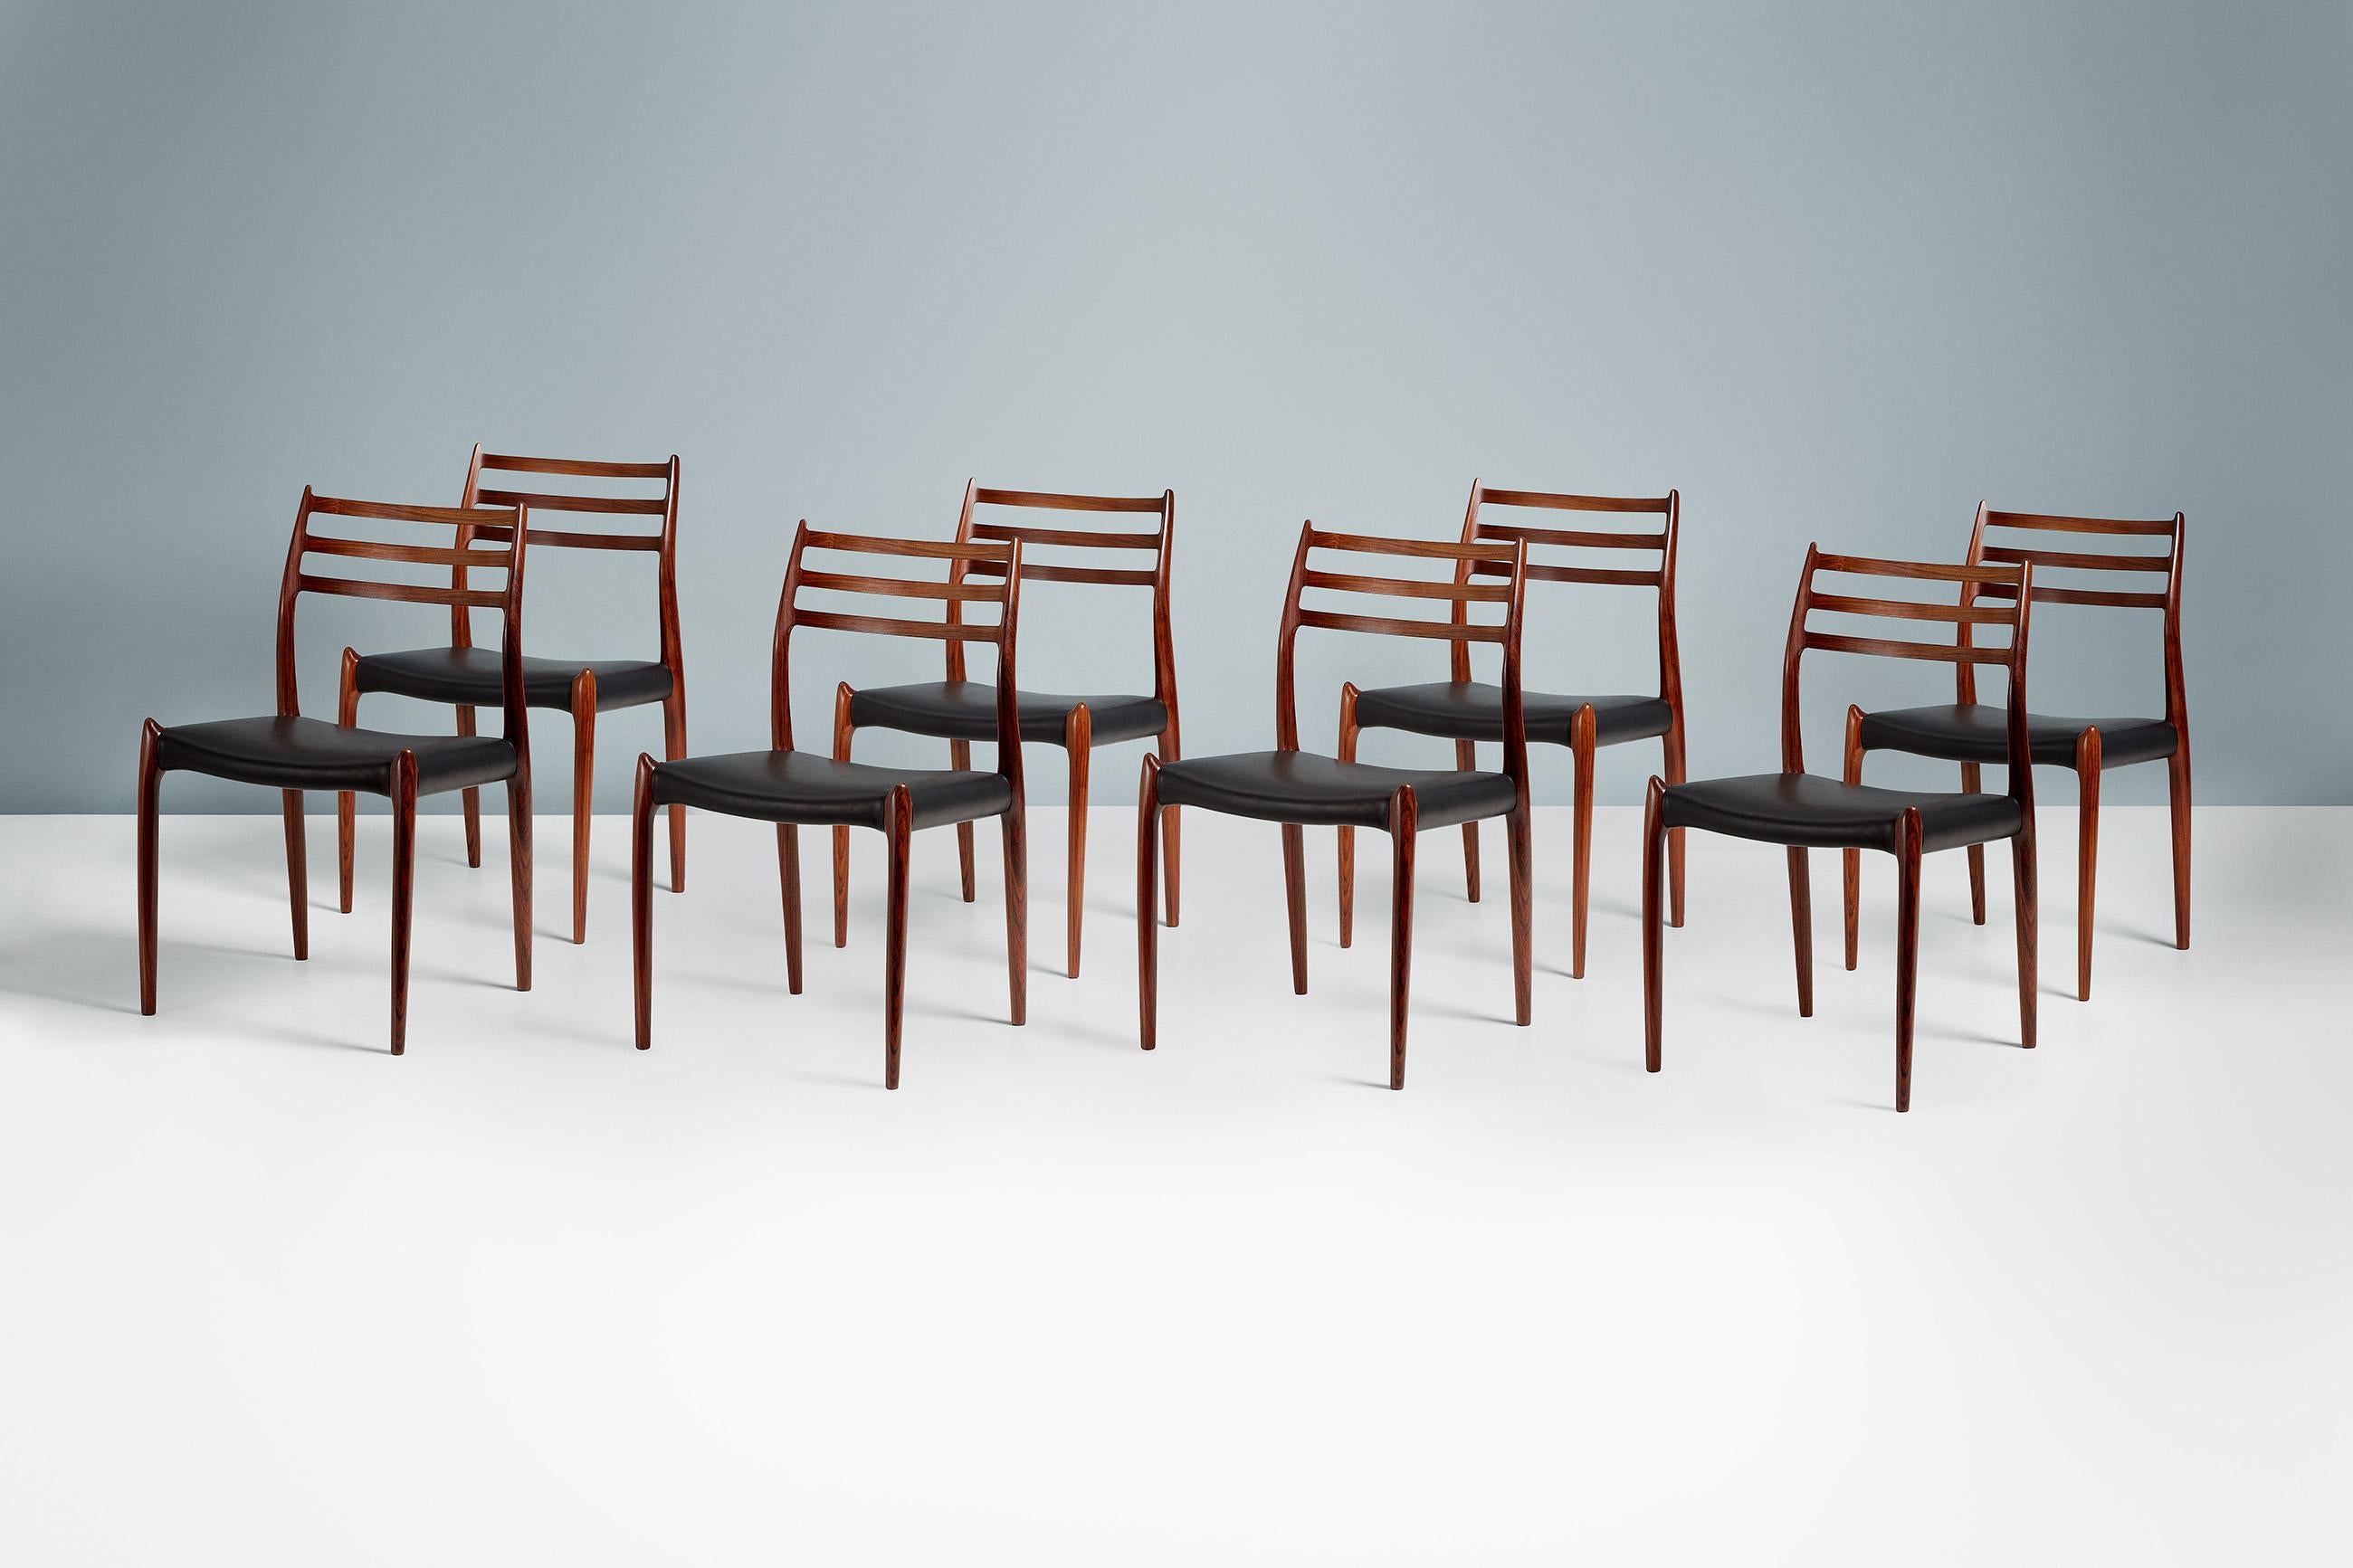 Niels O. Møller - Model 78 Dining Chairs, 1962

Set of 8 iconic model 78 dining chairs designed by Niels O. Møller for J.L. Moller Mobelfabrik, Denmark in 1962. The frames are made from highly figured, exquisite Brazilian rosewood, the finest of